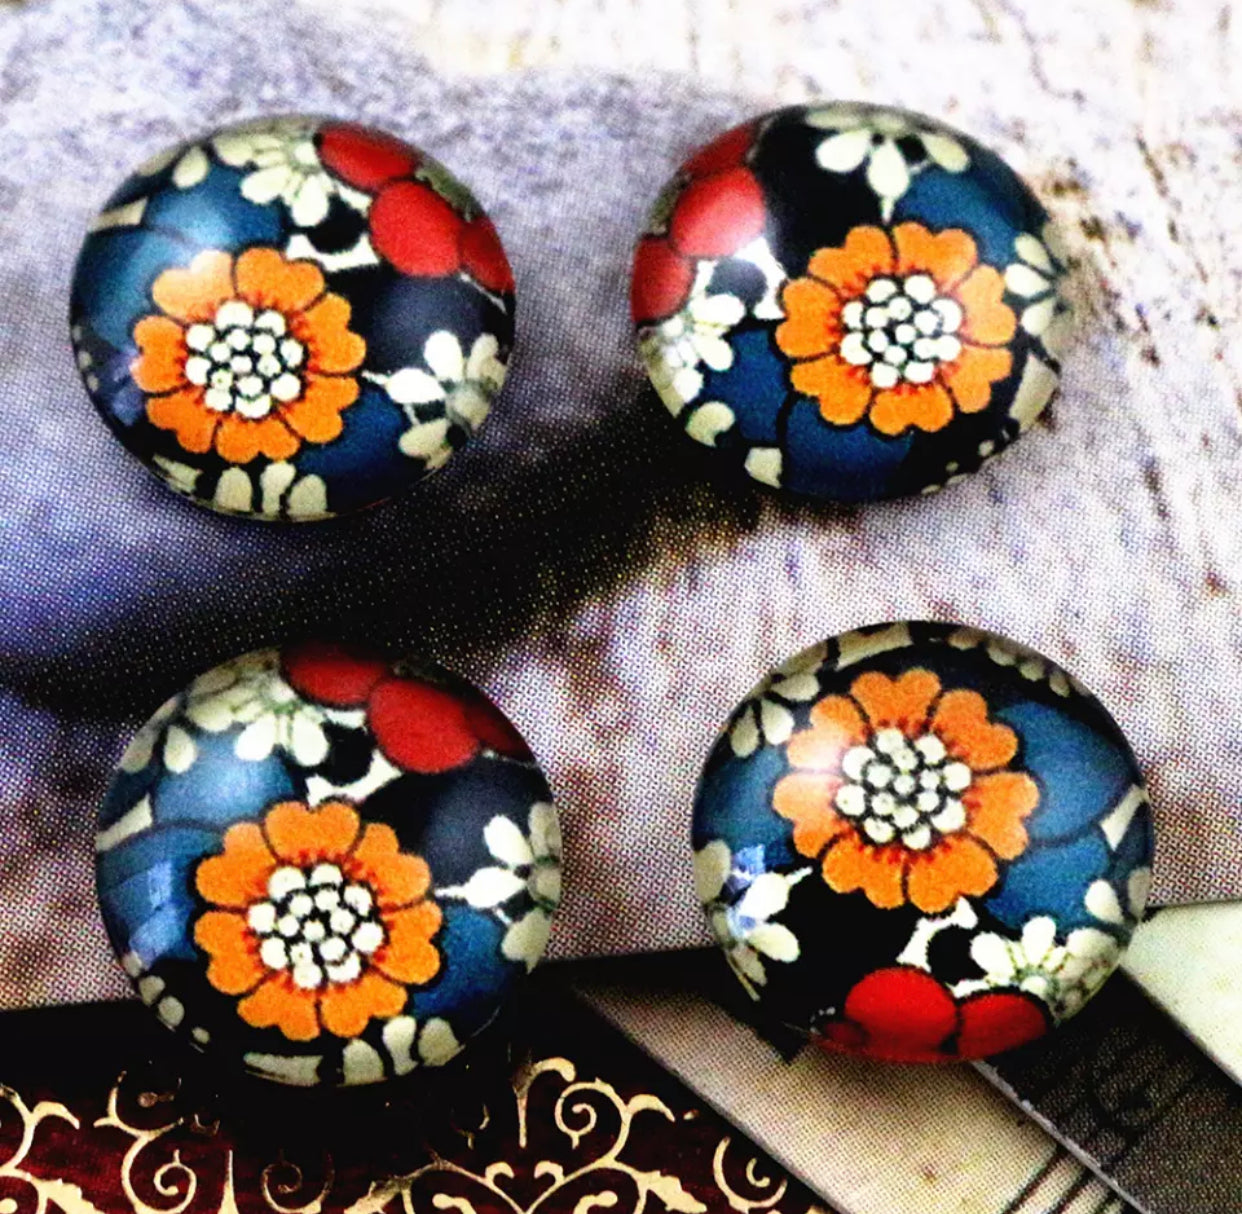 10pcs, 12mm Cabochons, in floral print